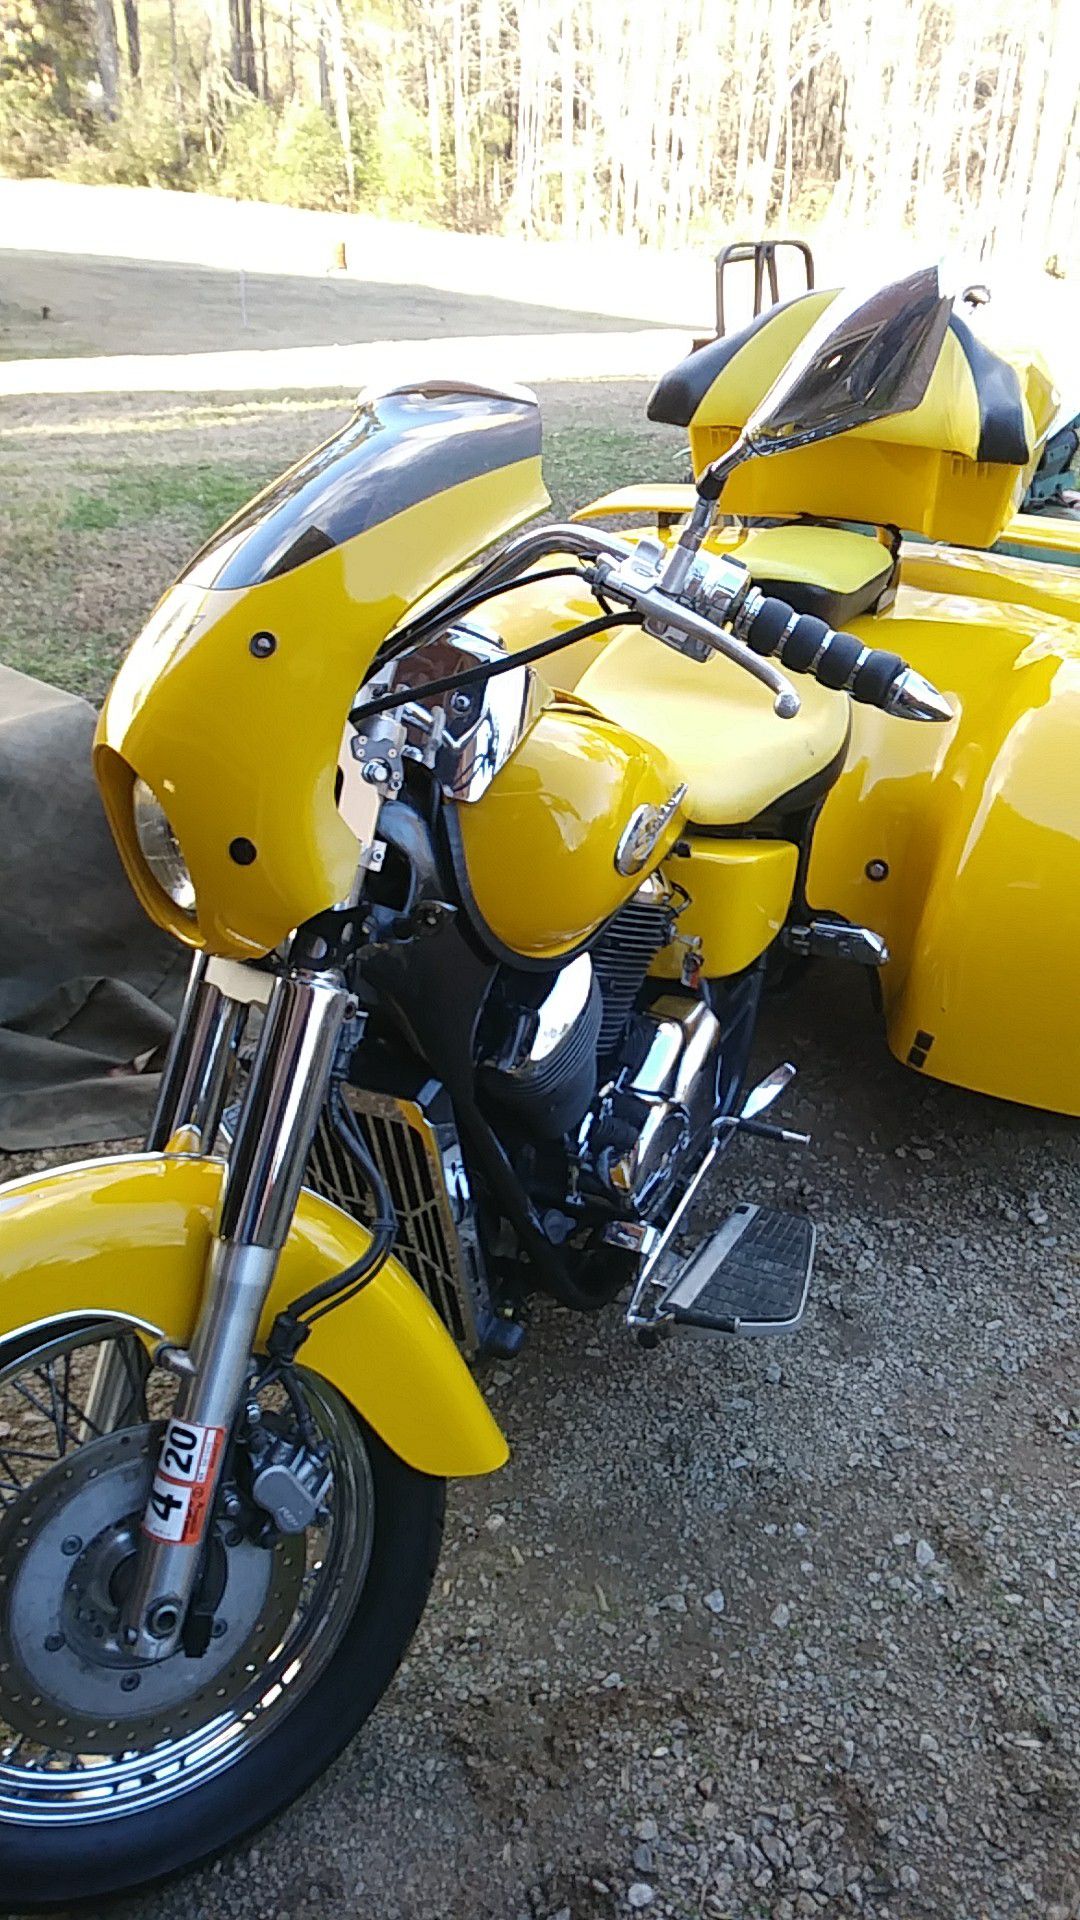 2003 Honda shadow 750 motorcycle for sale